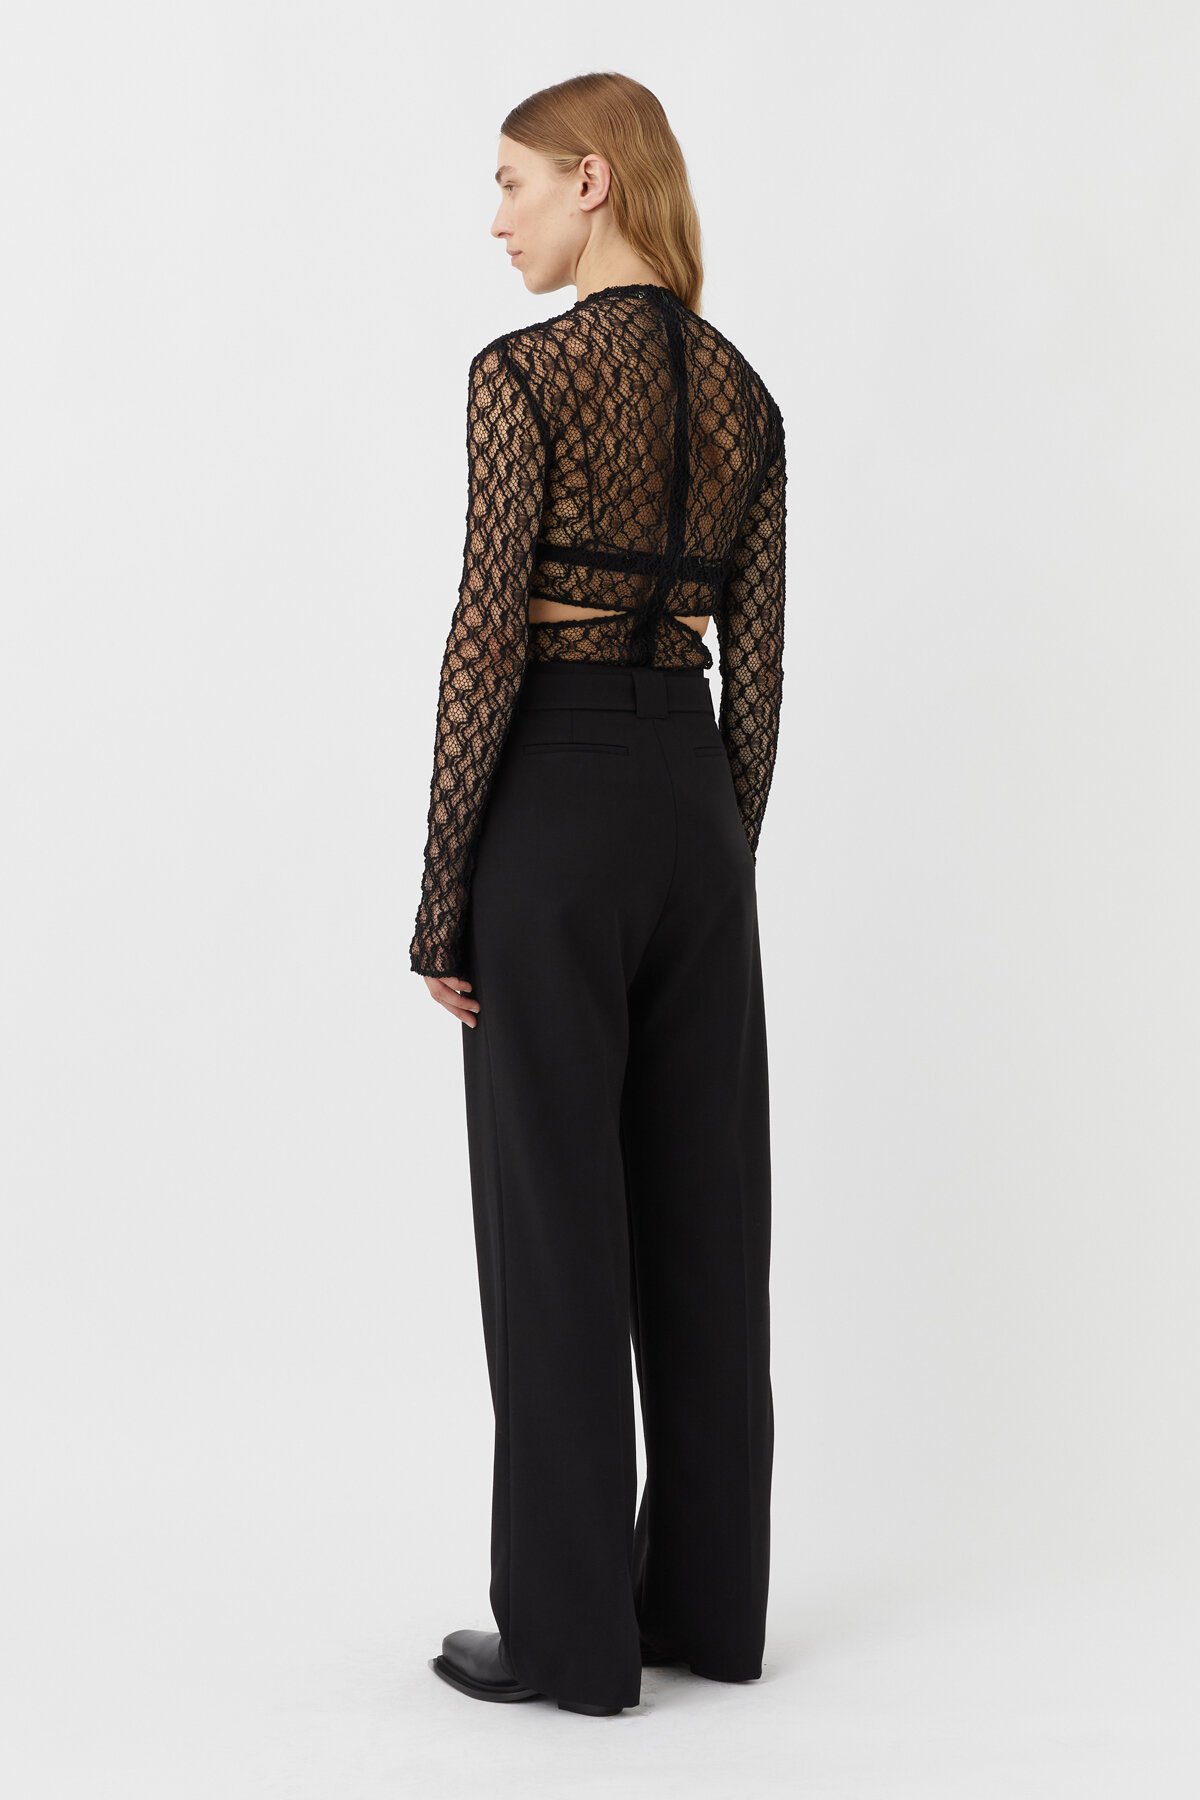 Camilla and Marc CAMELLIA HIGH WASTE Pant - Brand-Camilla and Marc ...